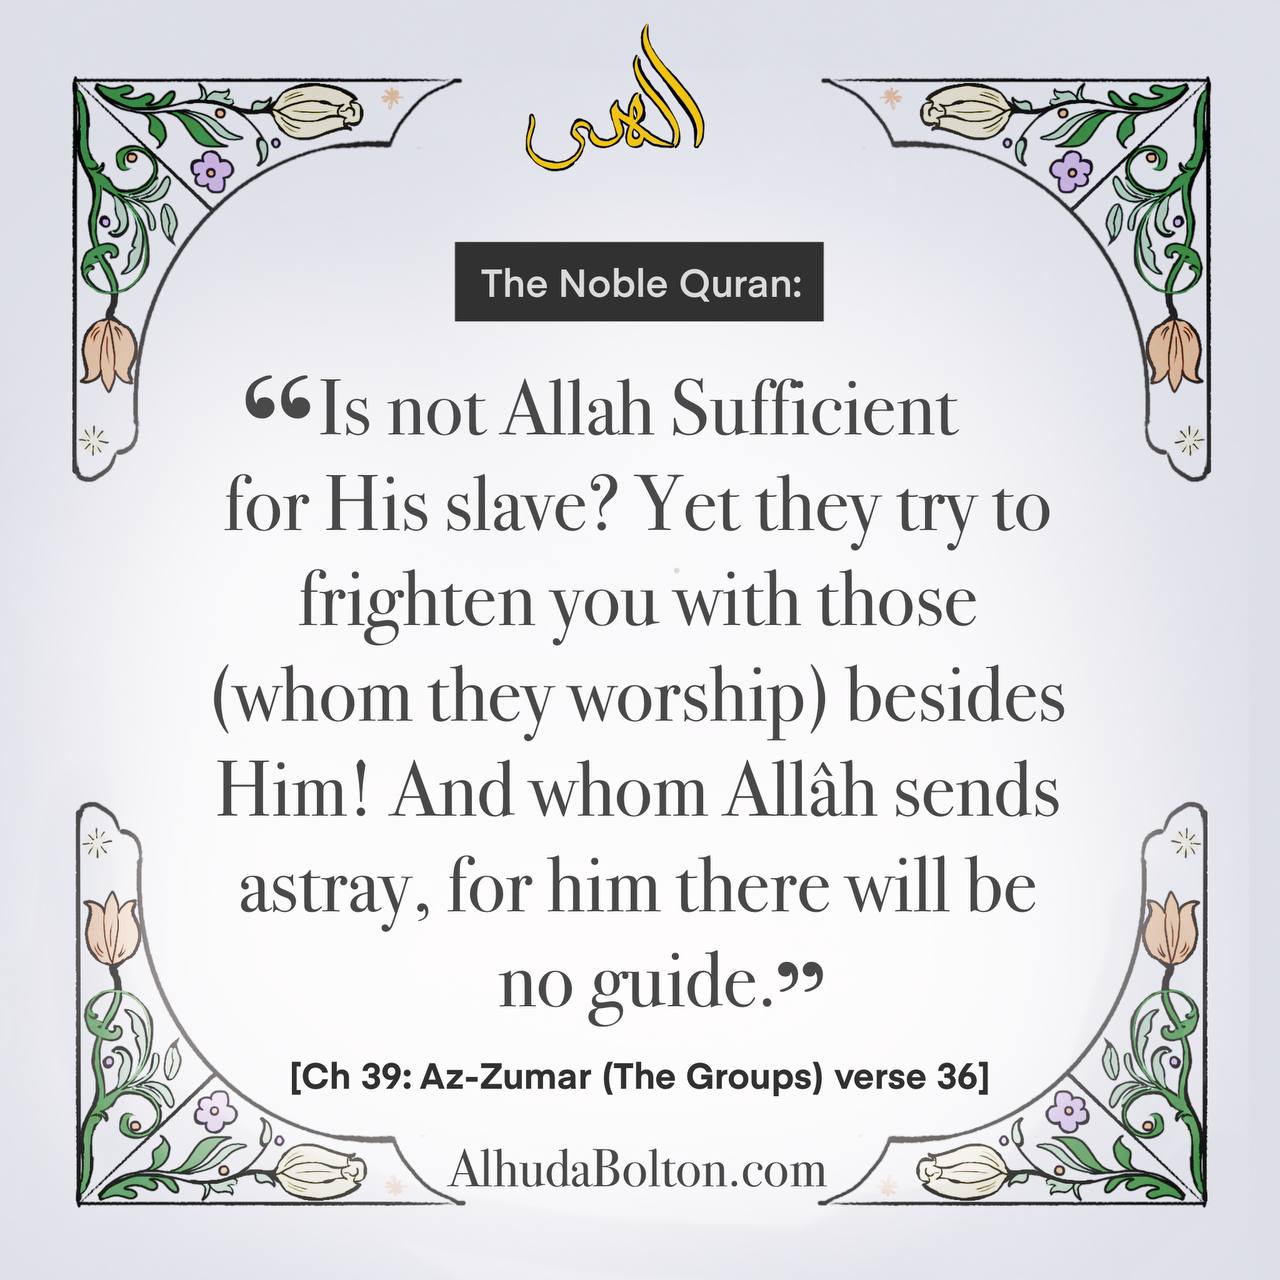 Quran: Is Allah not sufficient for his slave?